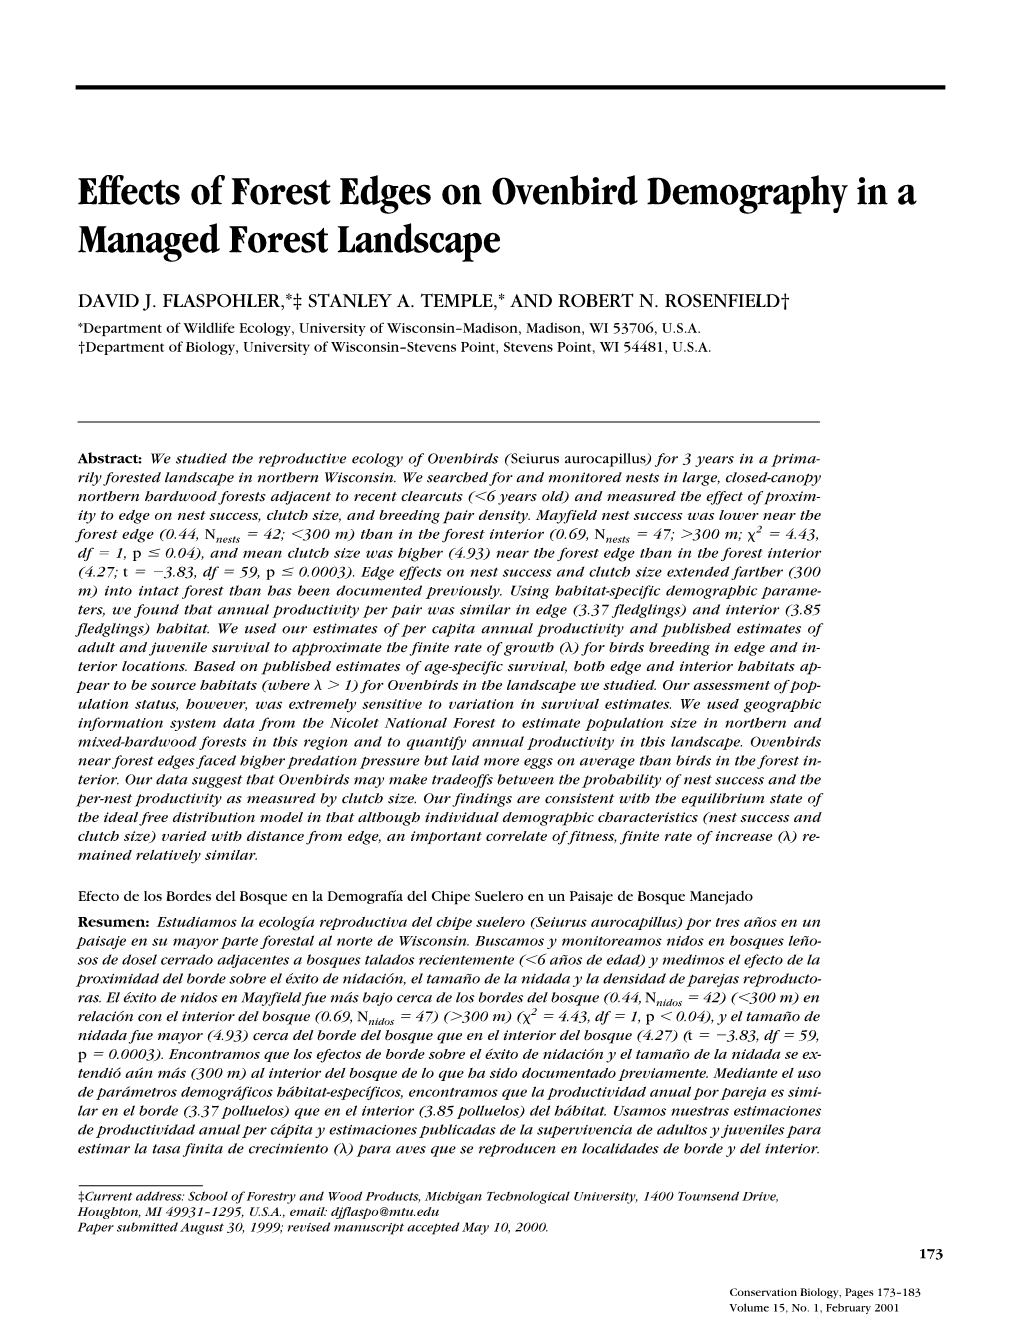 Effects of Forest Edges on Ovenbird Demography in a Managed Forest Landscape